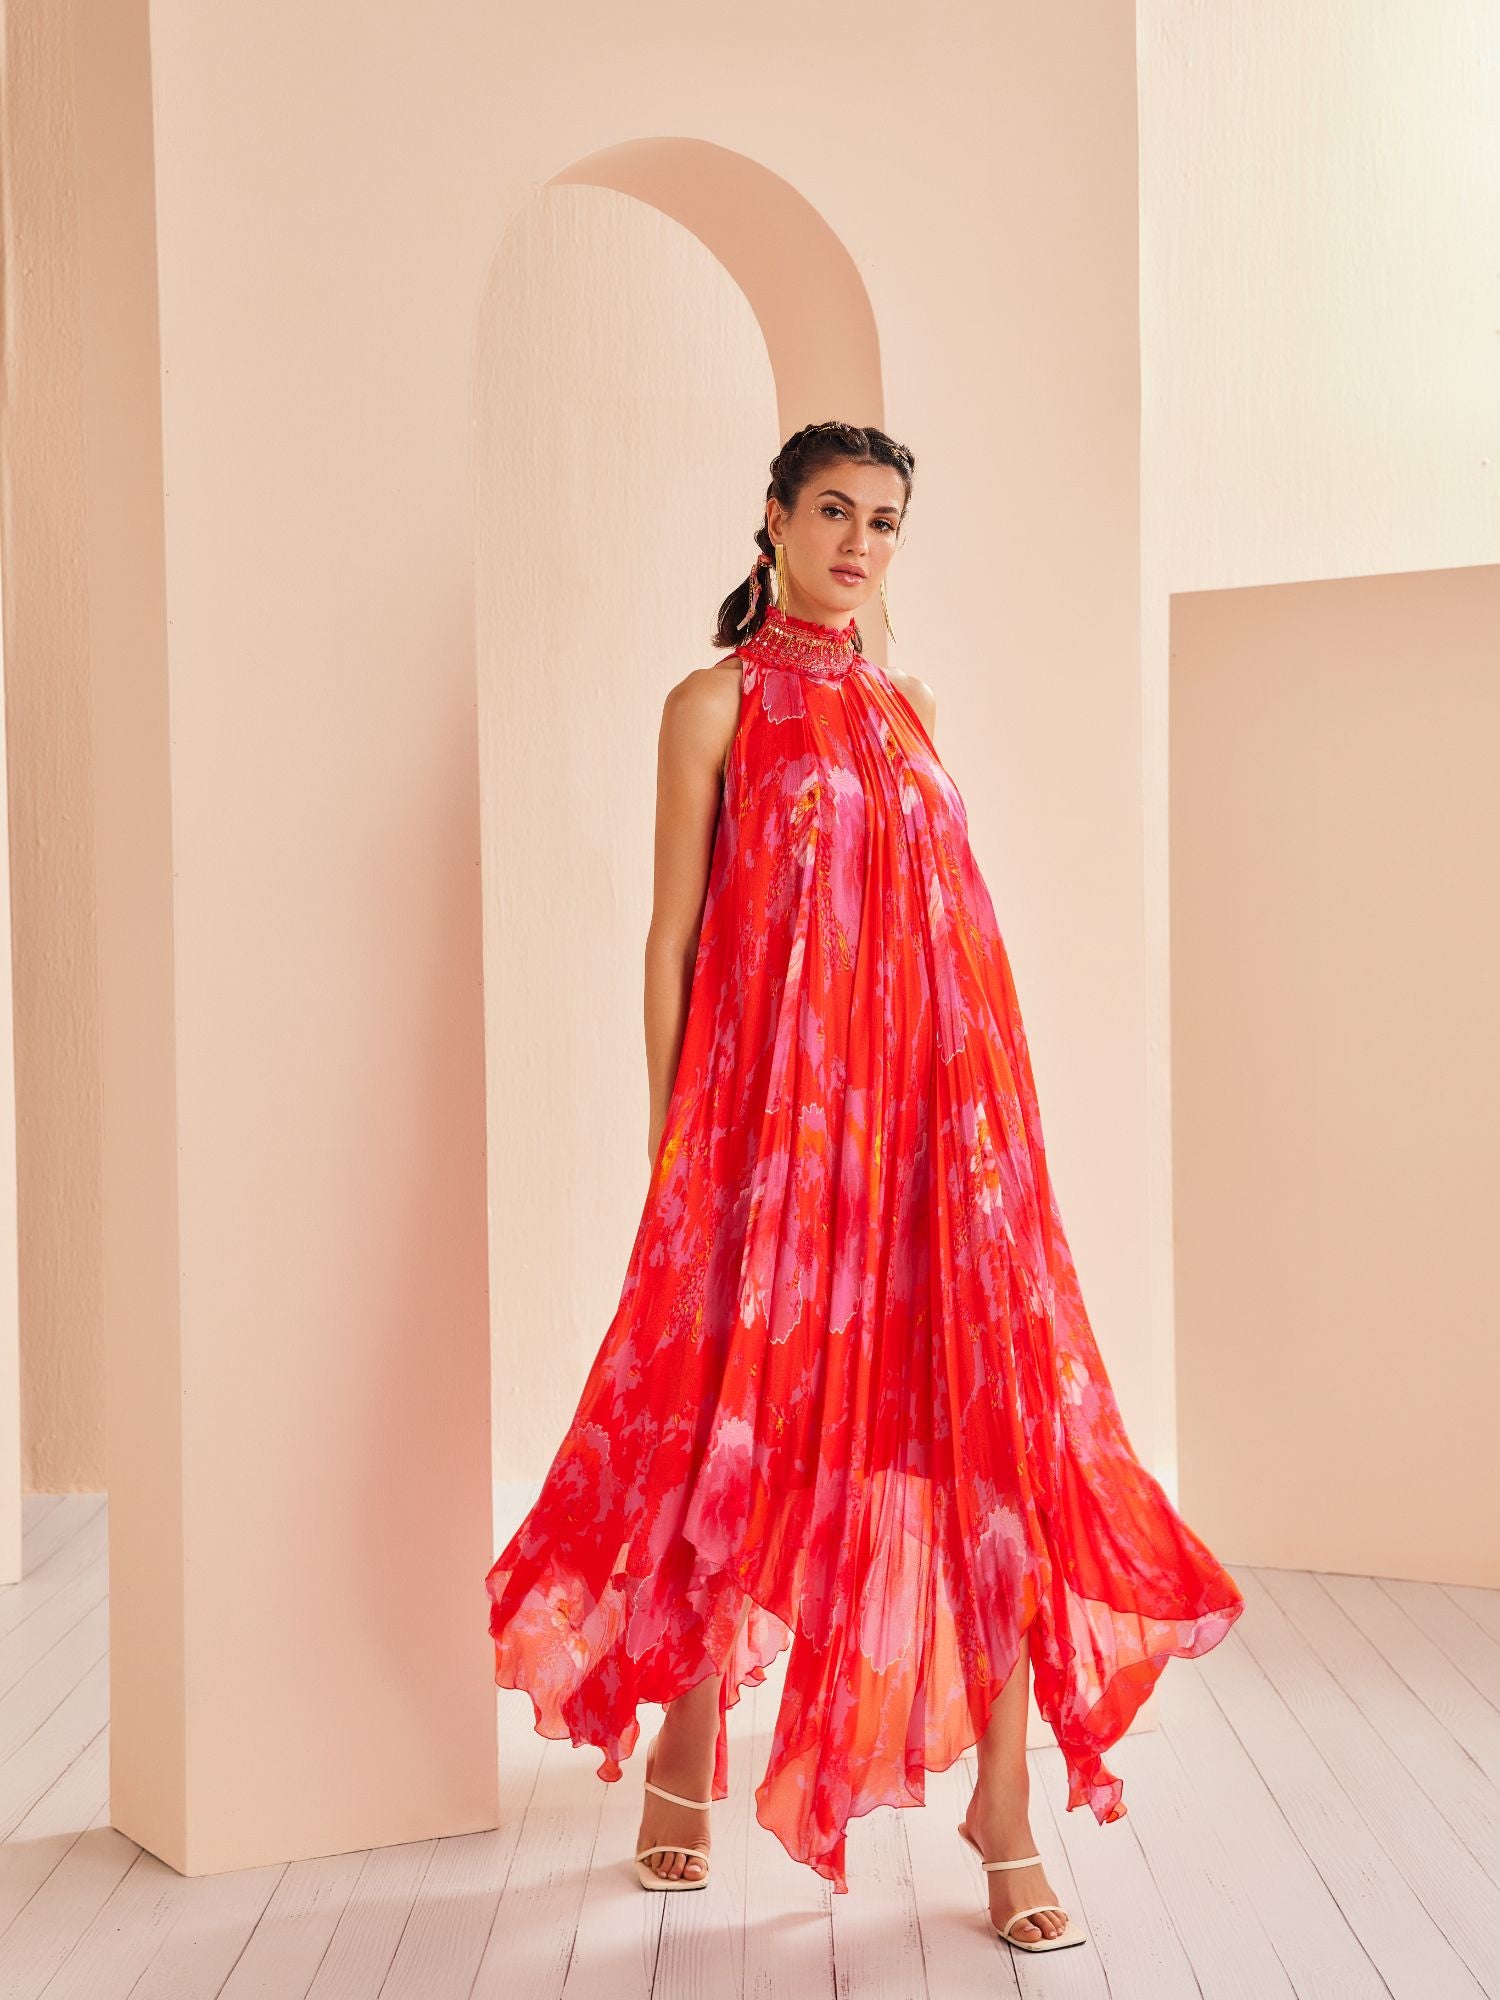 Printed chiffon high-low dress with hand-embroidered collar